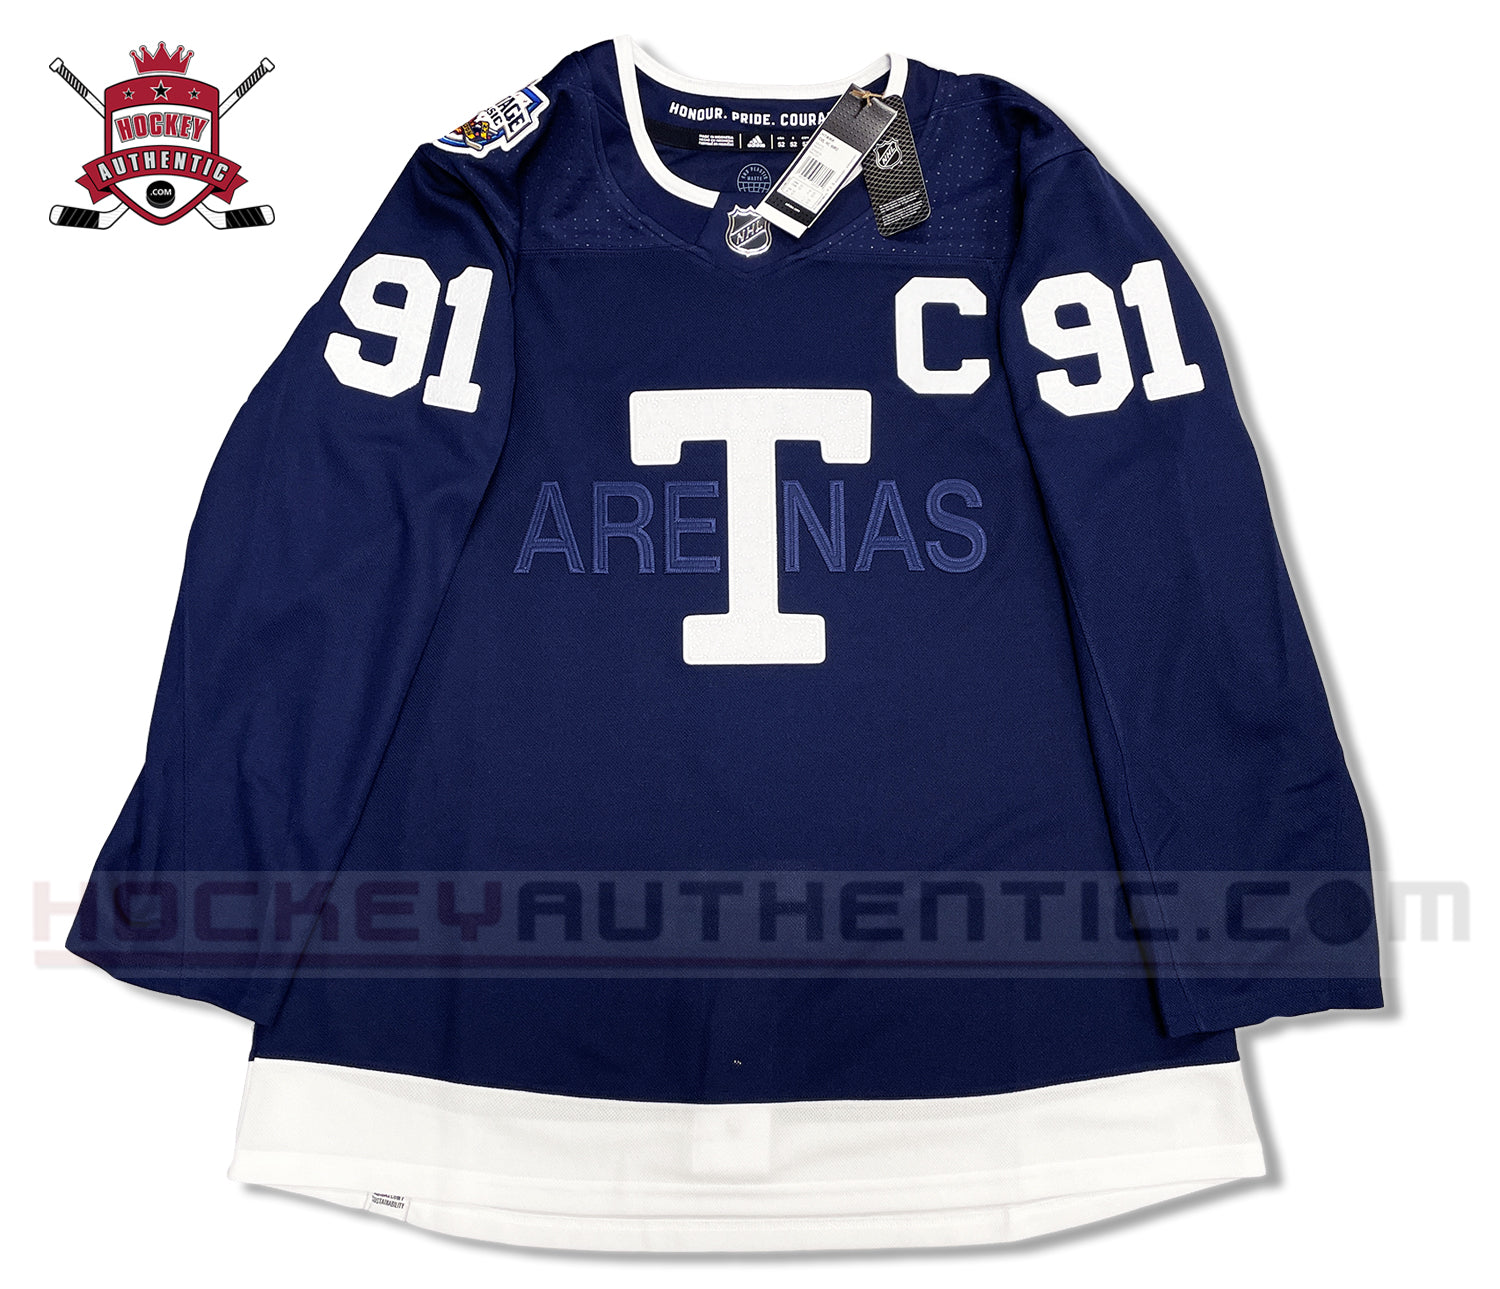 Tim and Friends on X: The Maple Leafs Heritage Classic jersey